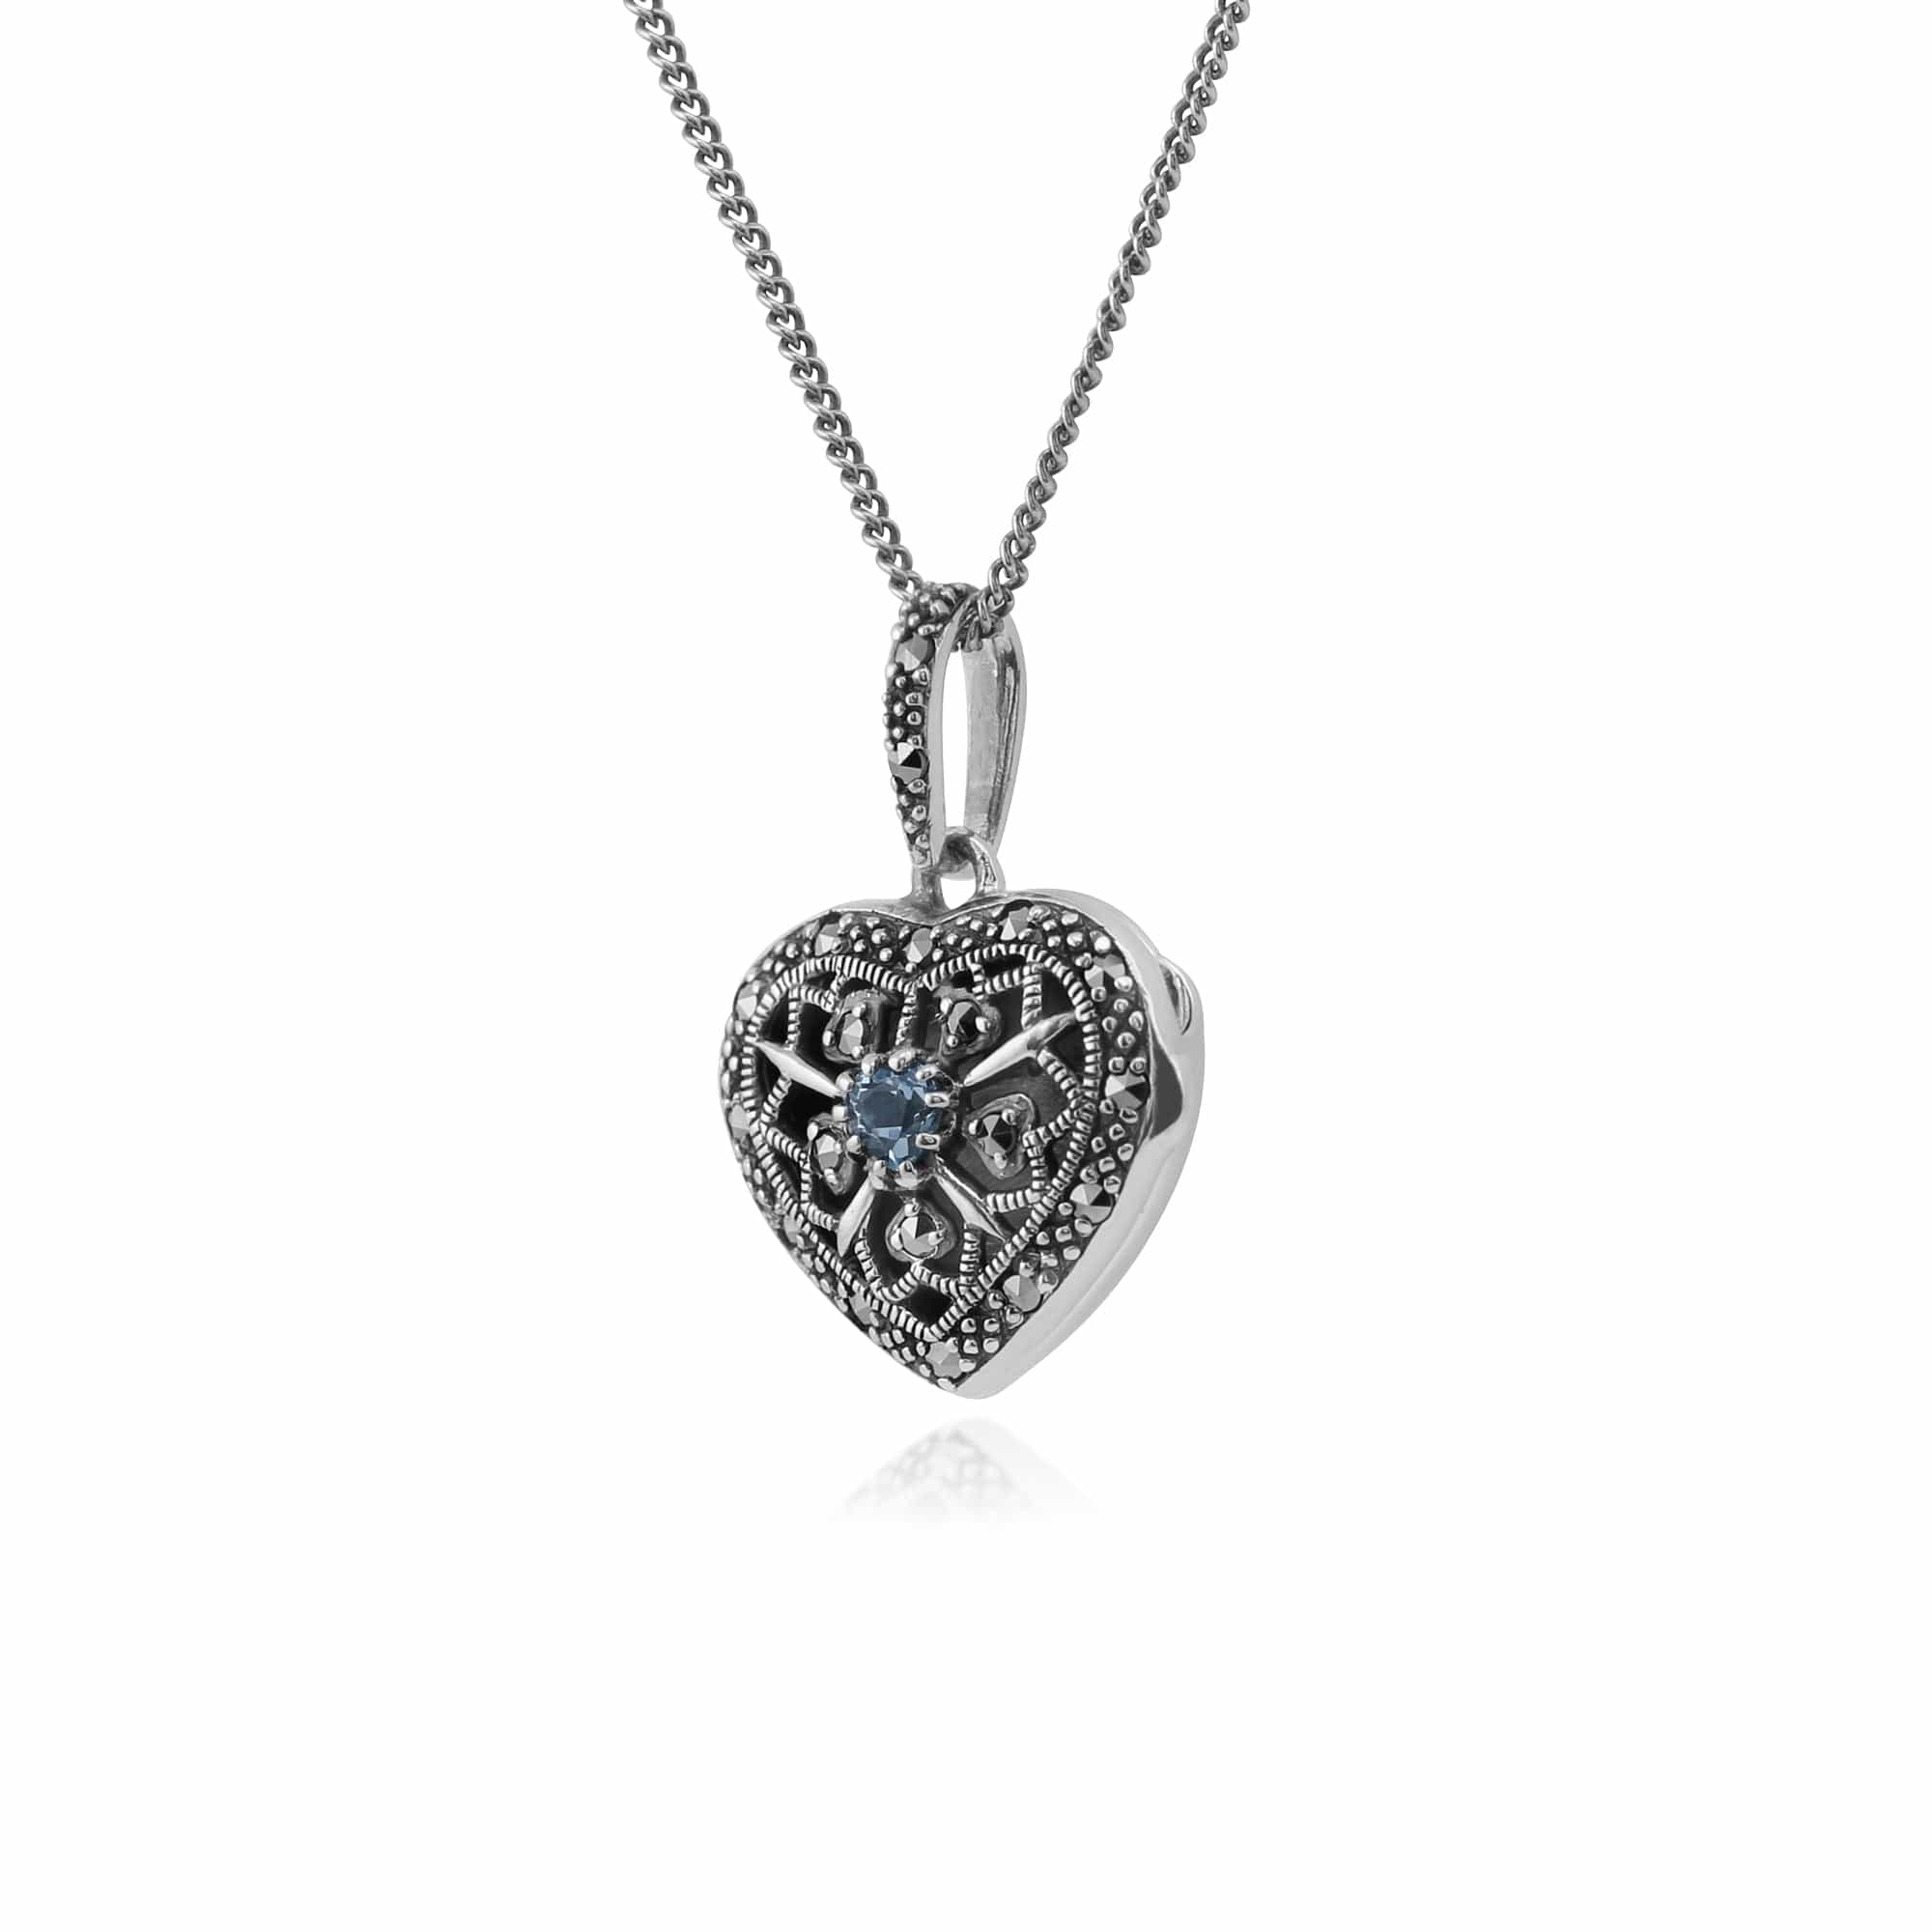 214N461906925 Art Nouveau Style Round Aquamarine & Marcasite Heart Necklace in 925 Sterling Silver 2